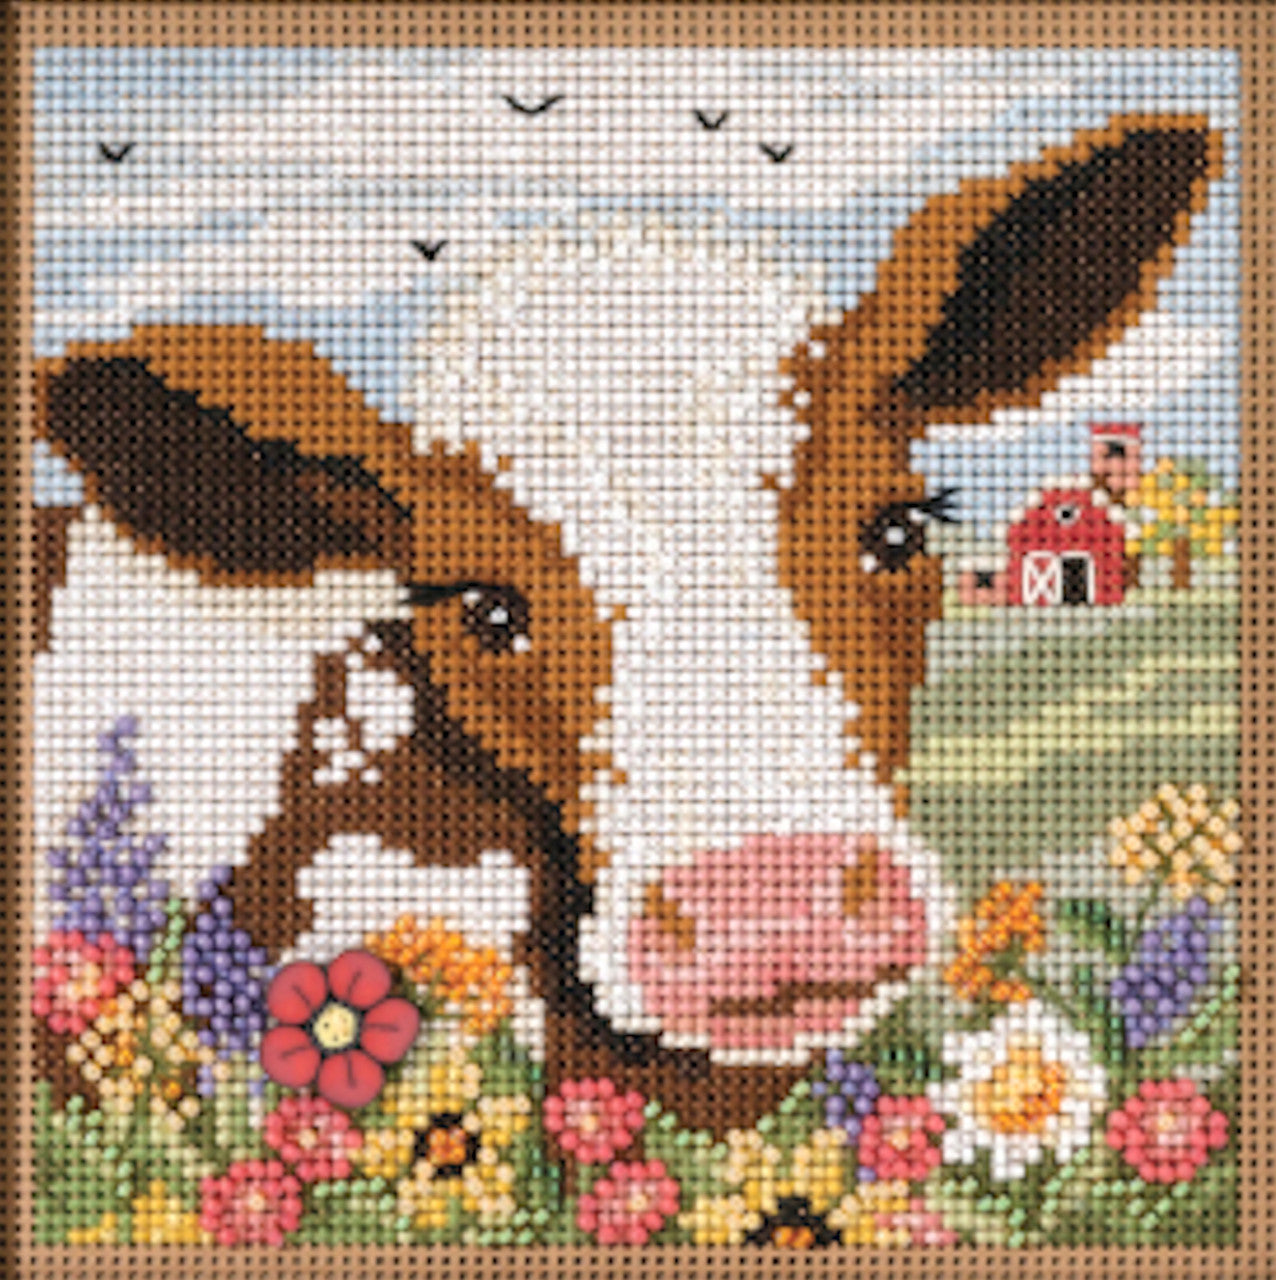 Buttons & Beads - Spotted Cow counted cross stitch kit